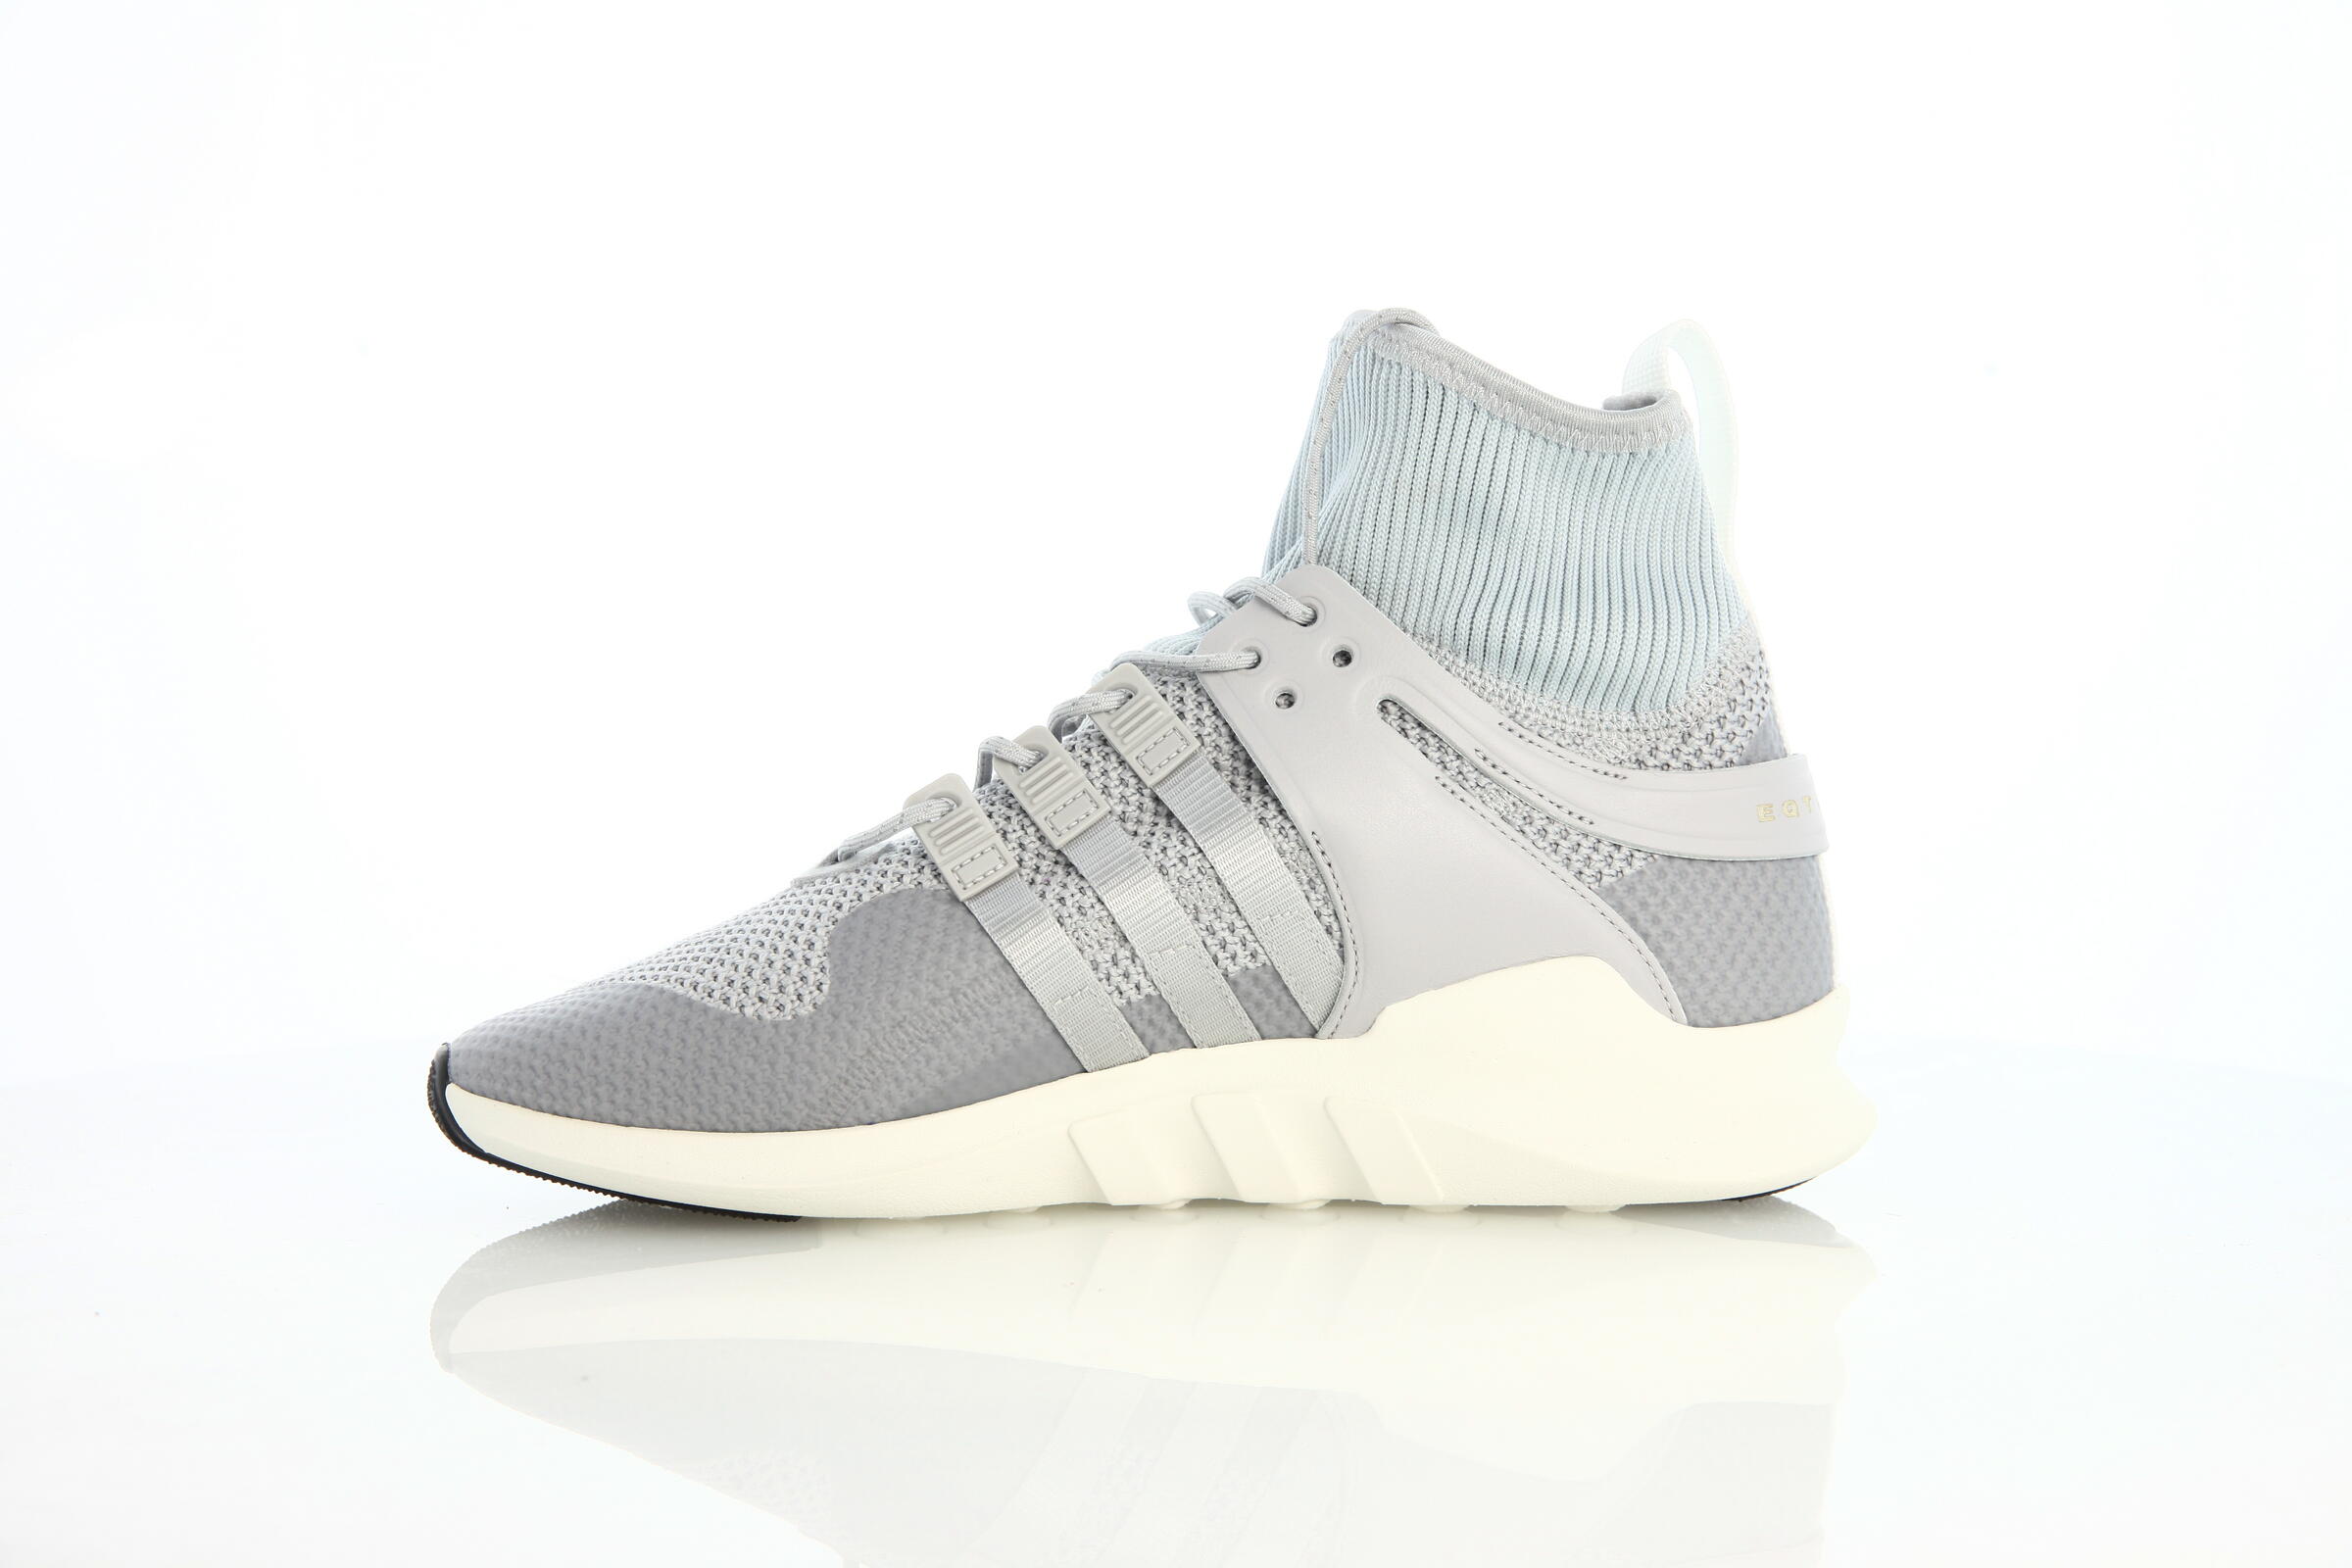 adidas Performance EQT Support Adventure Pack "Grey"